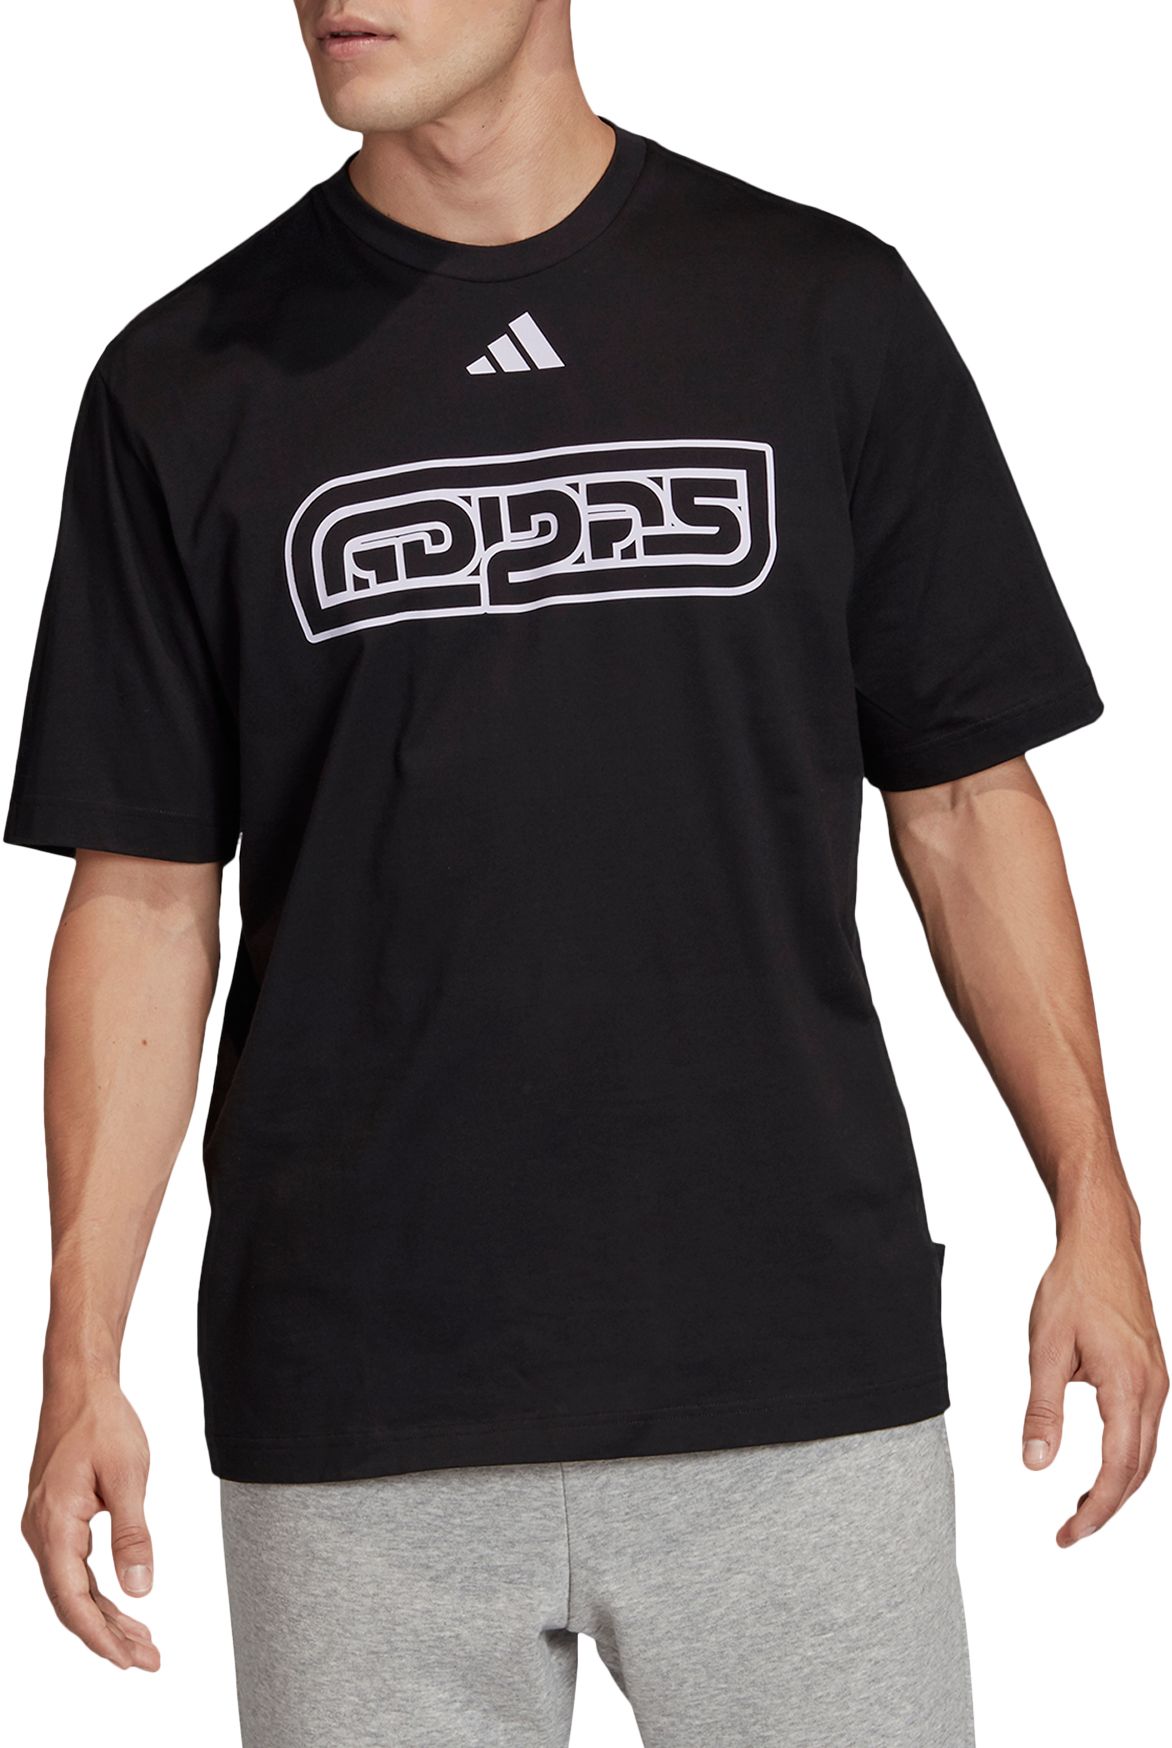 adidas Men's The Package Language T-Shirt - .10